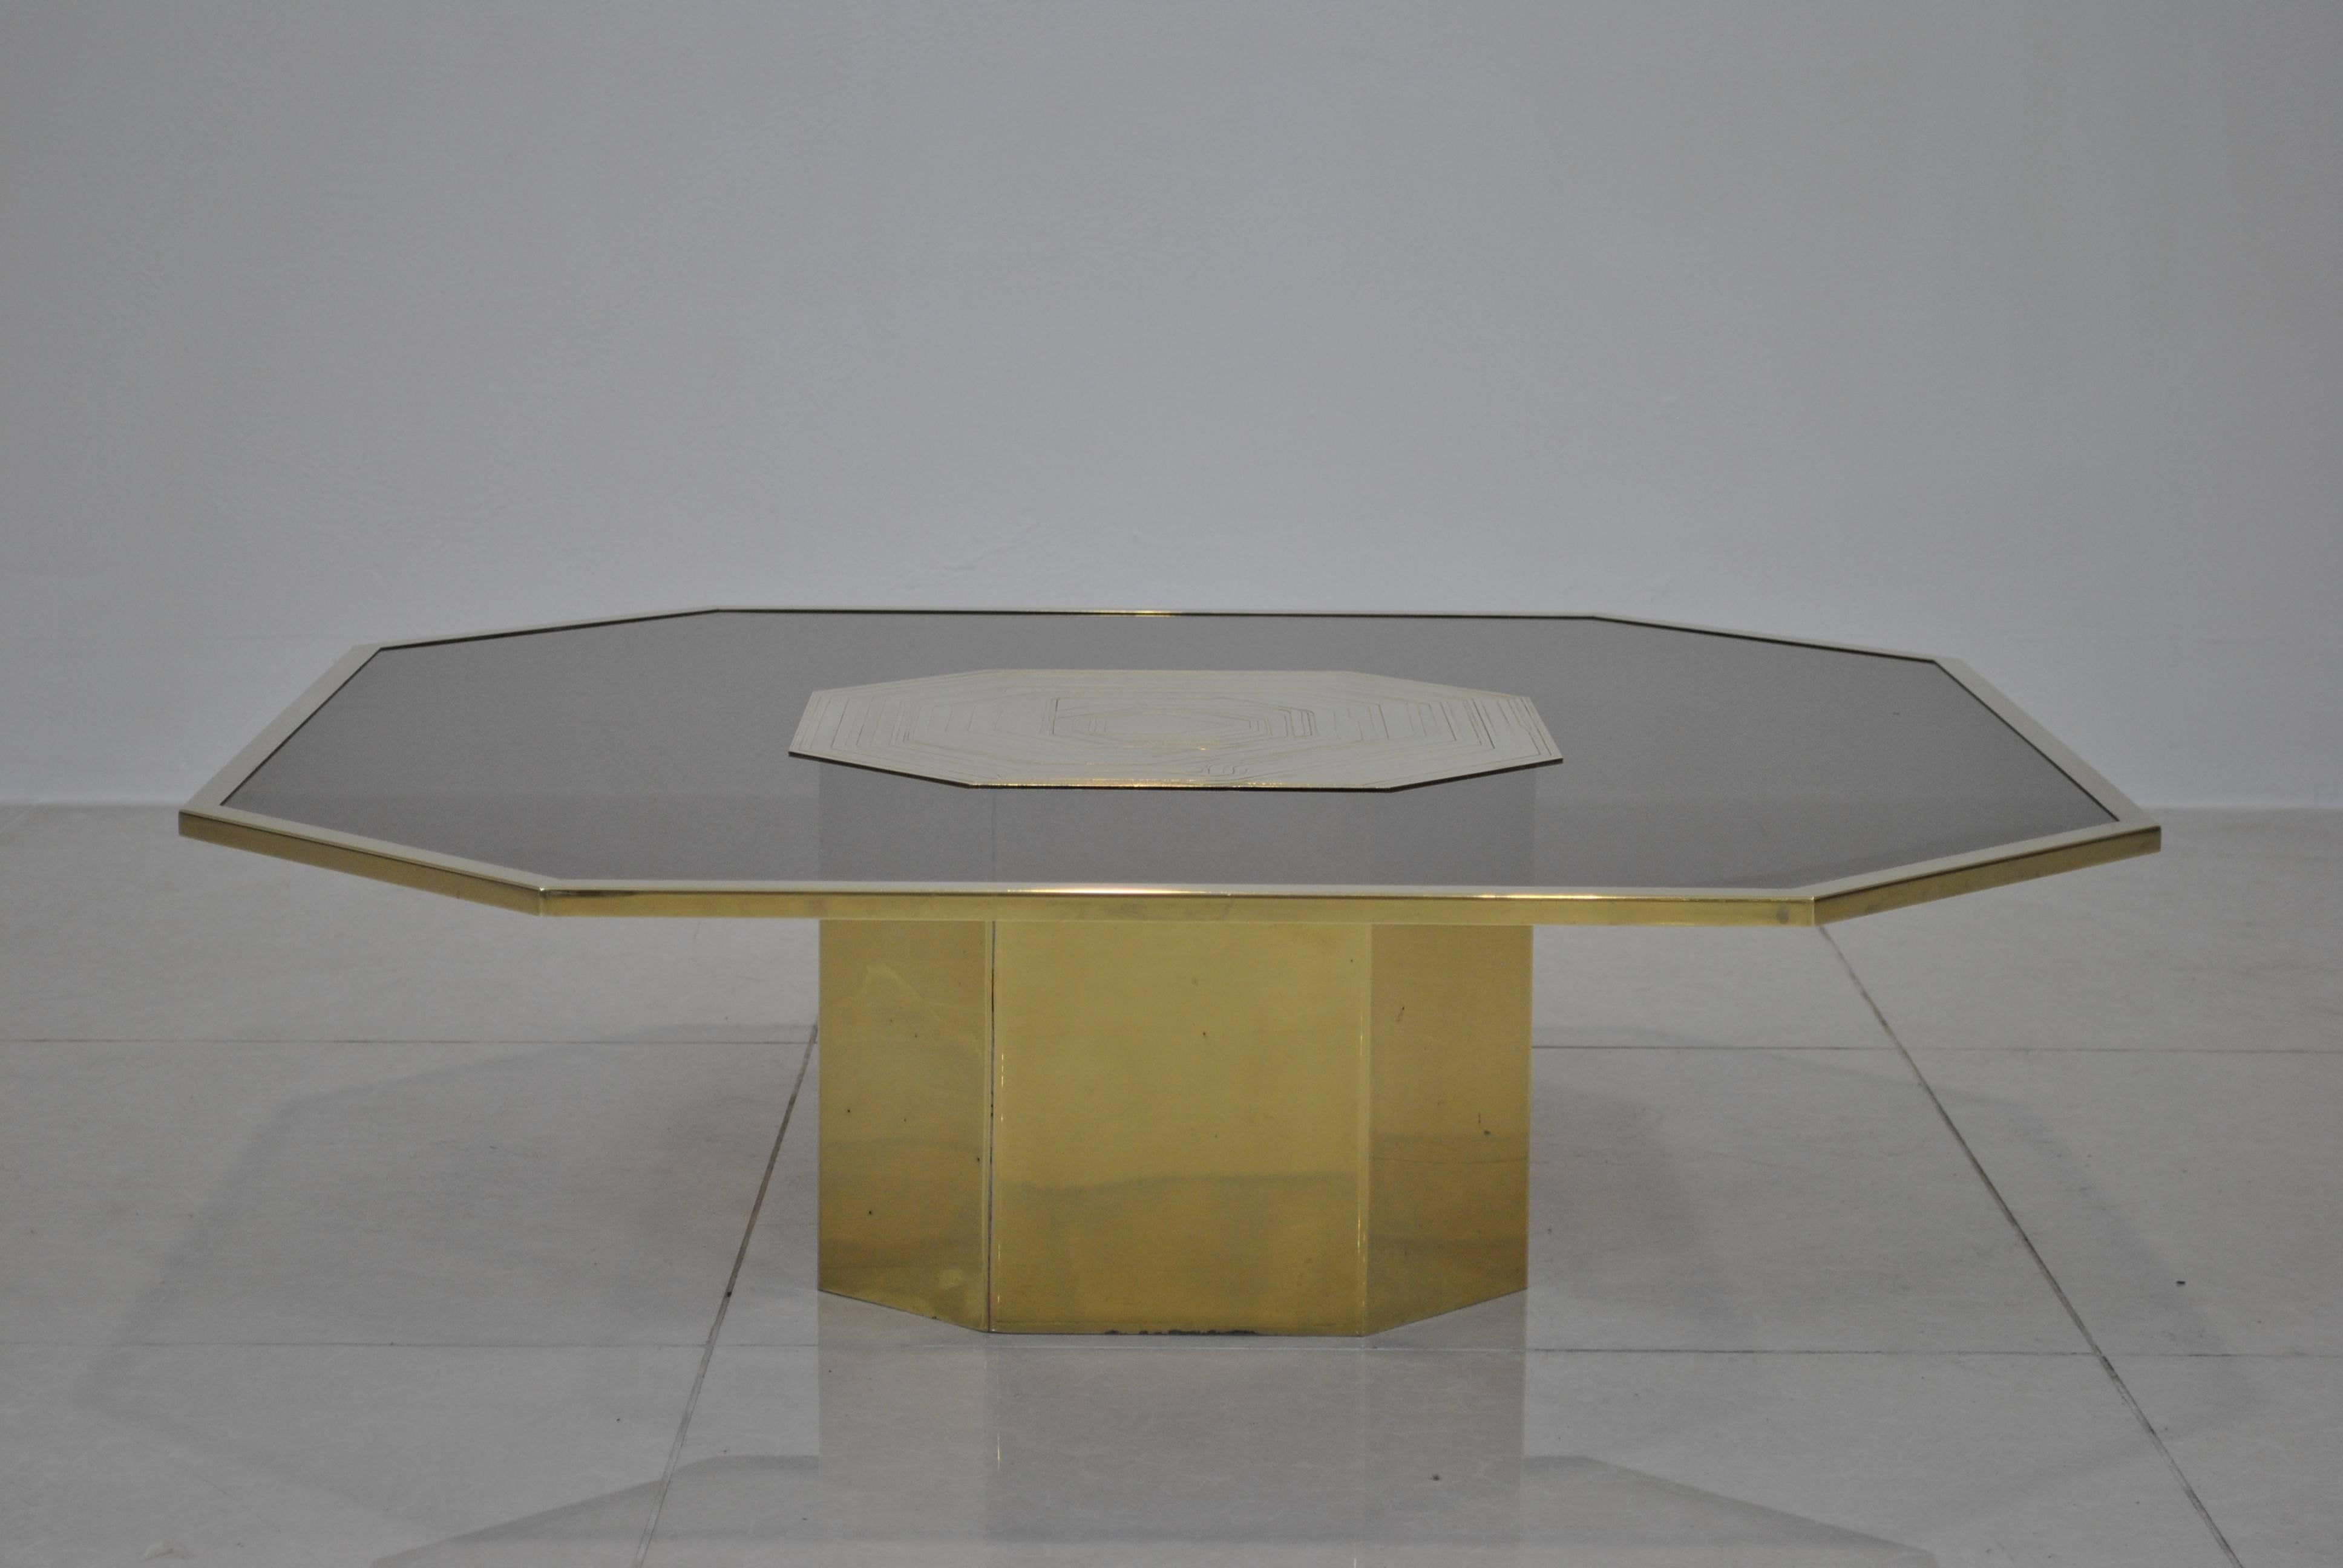 Rare and nice acid etched brass and smoked glass coffee table with modernist etch by Jenalzi Jenatzy. Jenatzy was the wife of Armand Jonckers.

The table is signed and in very good condition, with evident signs of age and oxydation.

Great match